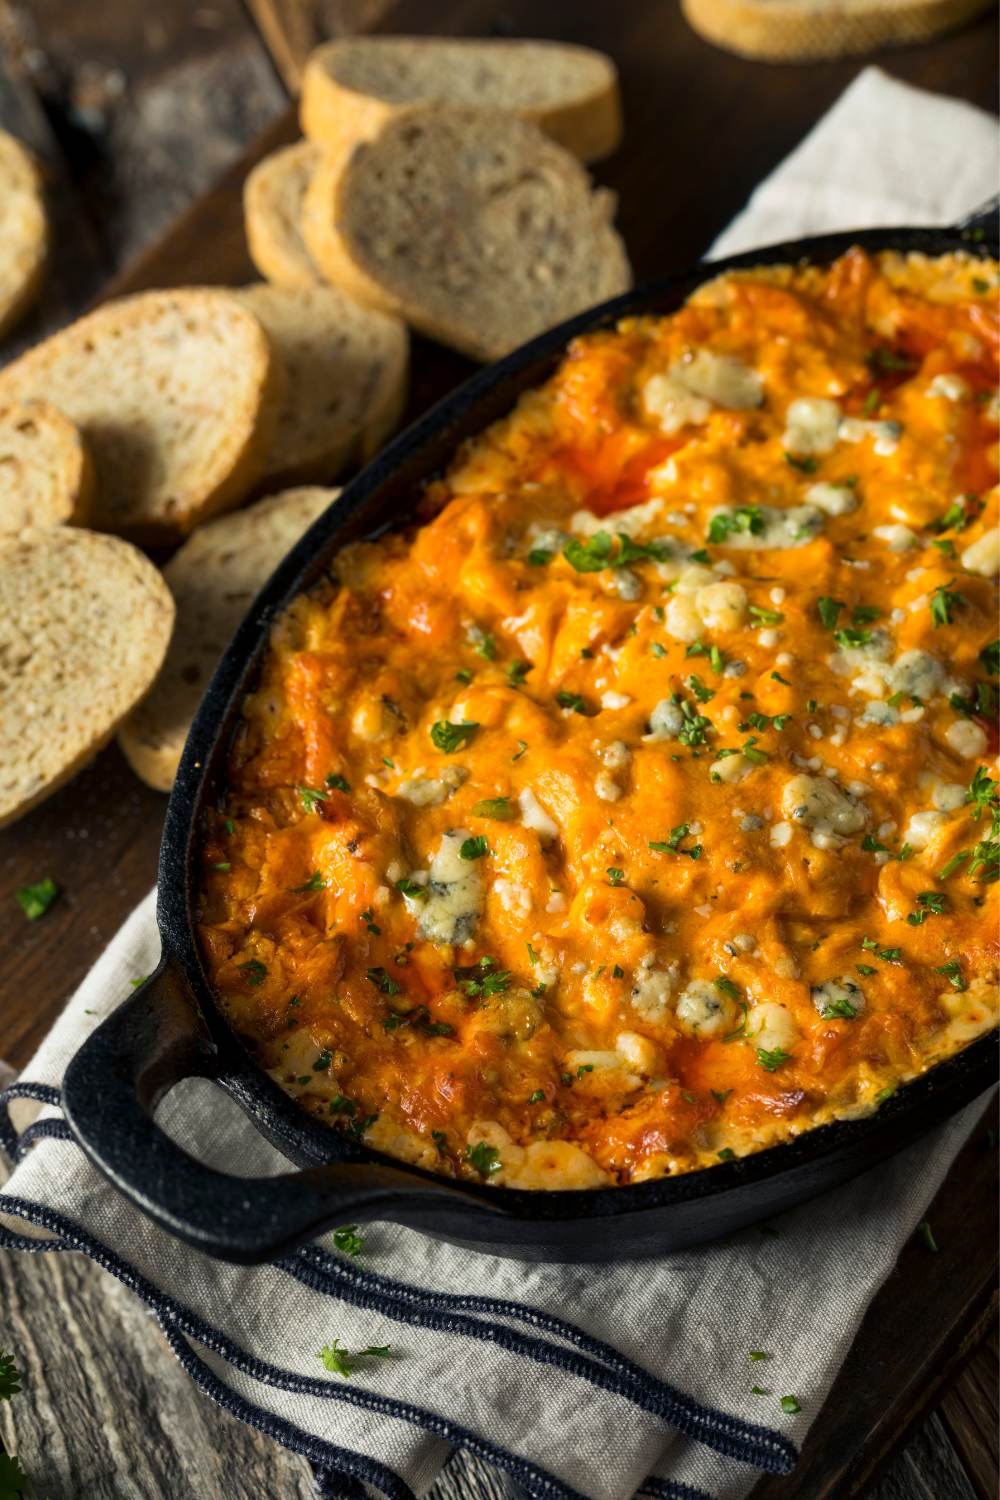 Buffalo chicken dip with a topping of blue cheese and parsley, next to bread slices.